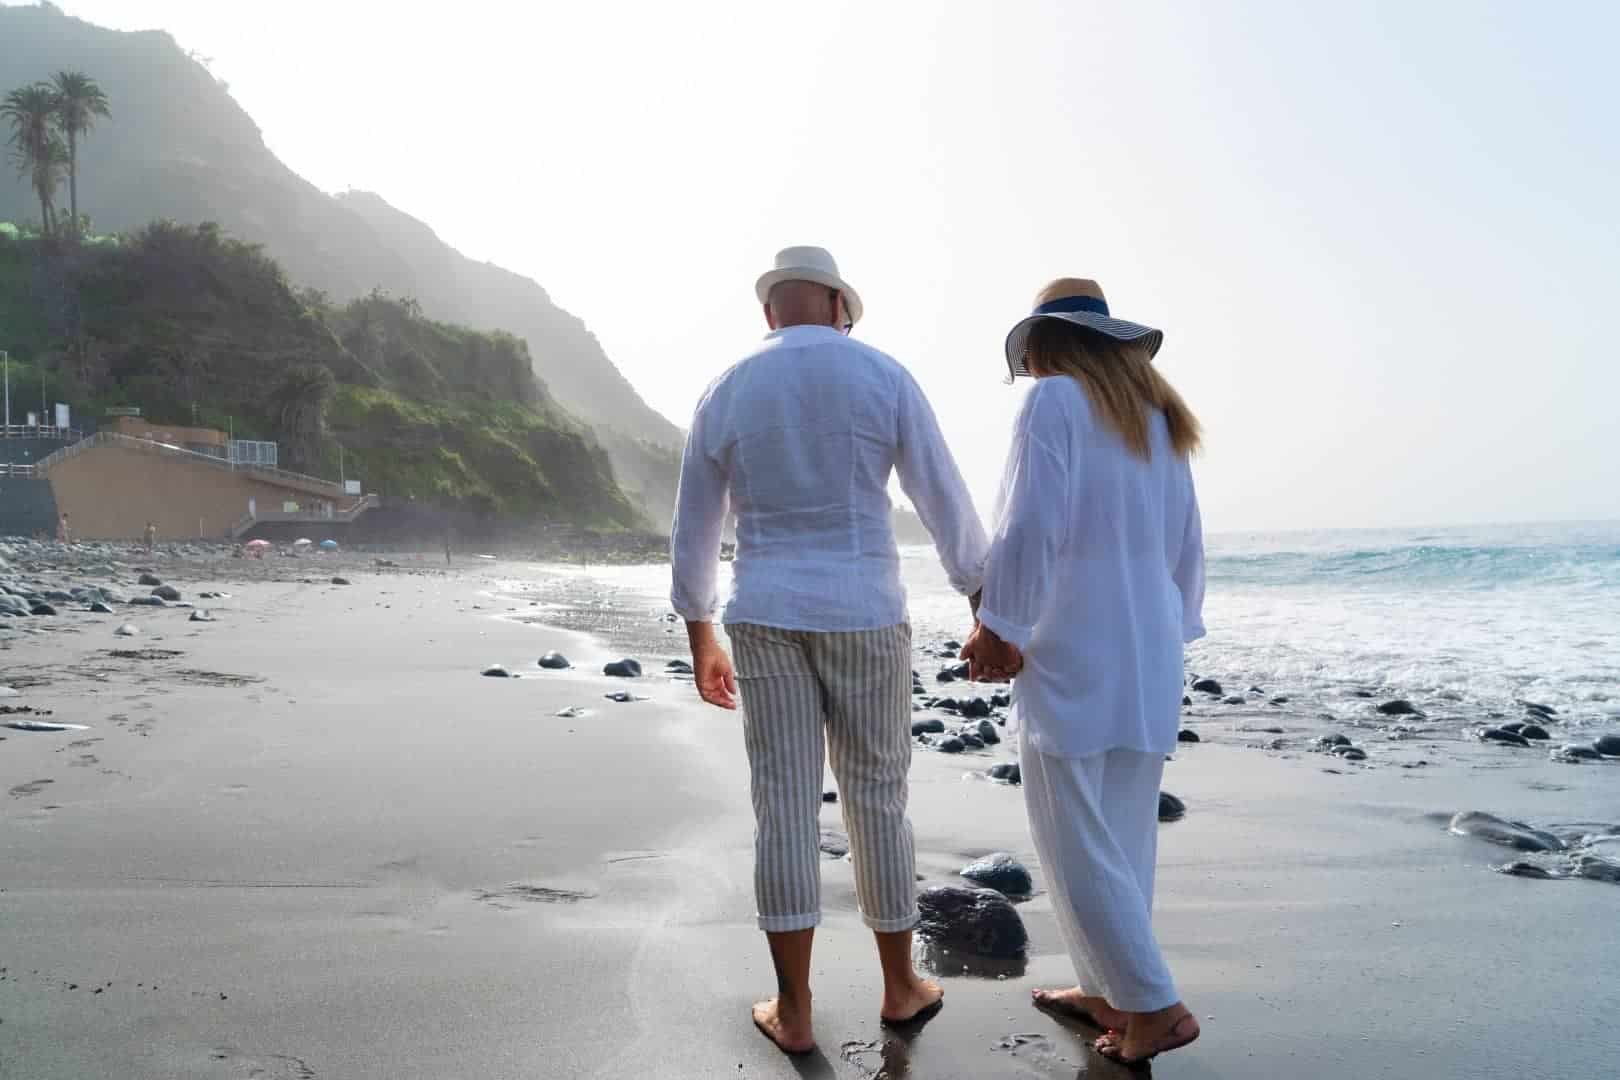 A retired couple holding hands and walking along a beach, with their backs to the camera. They are both wearing light, airy clothing and wide-brimmed hats. The beach is scattered with dark stones, and gentle waves lap at the shore. In the background, a green mountain slopes down to the coastline, and a building is nestled at the base of the slope, partially obscured by the foliage.